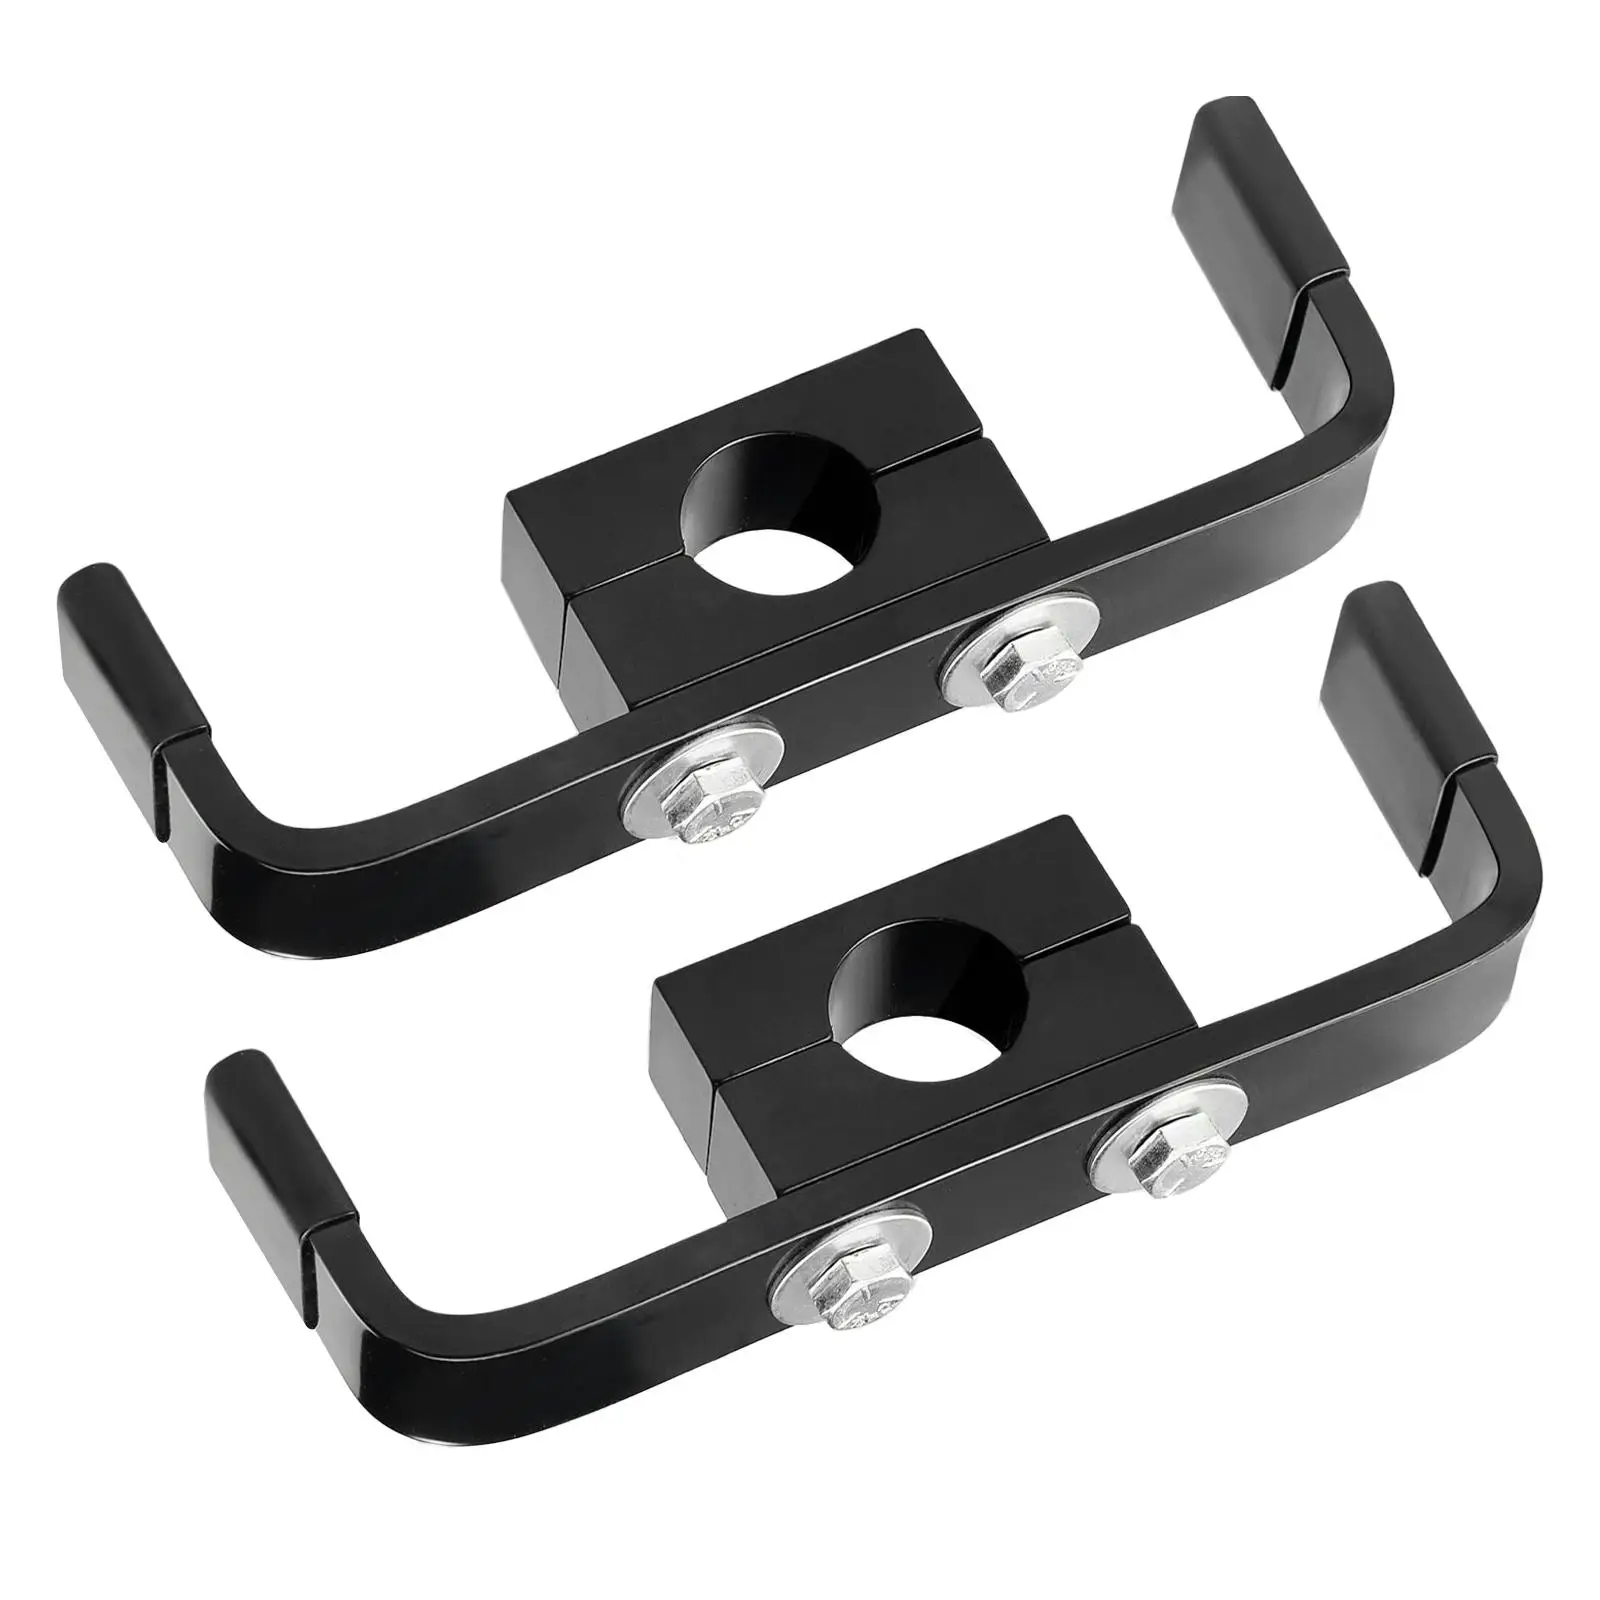 Camshaft Holding Tool for Expedition 5.4L V8 Engines Easy to Install